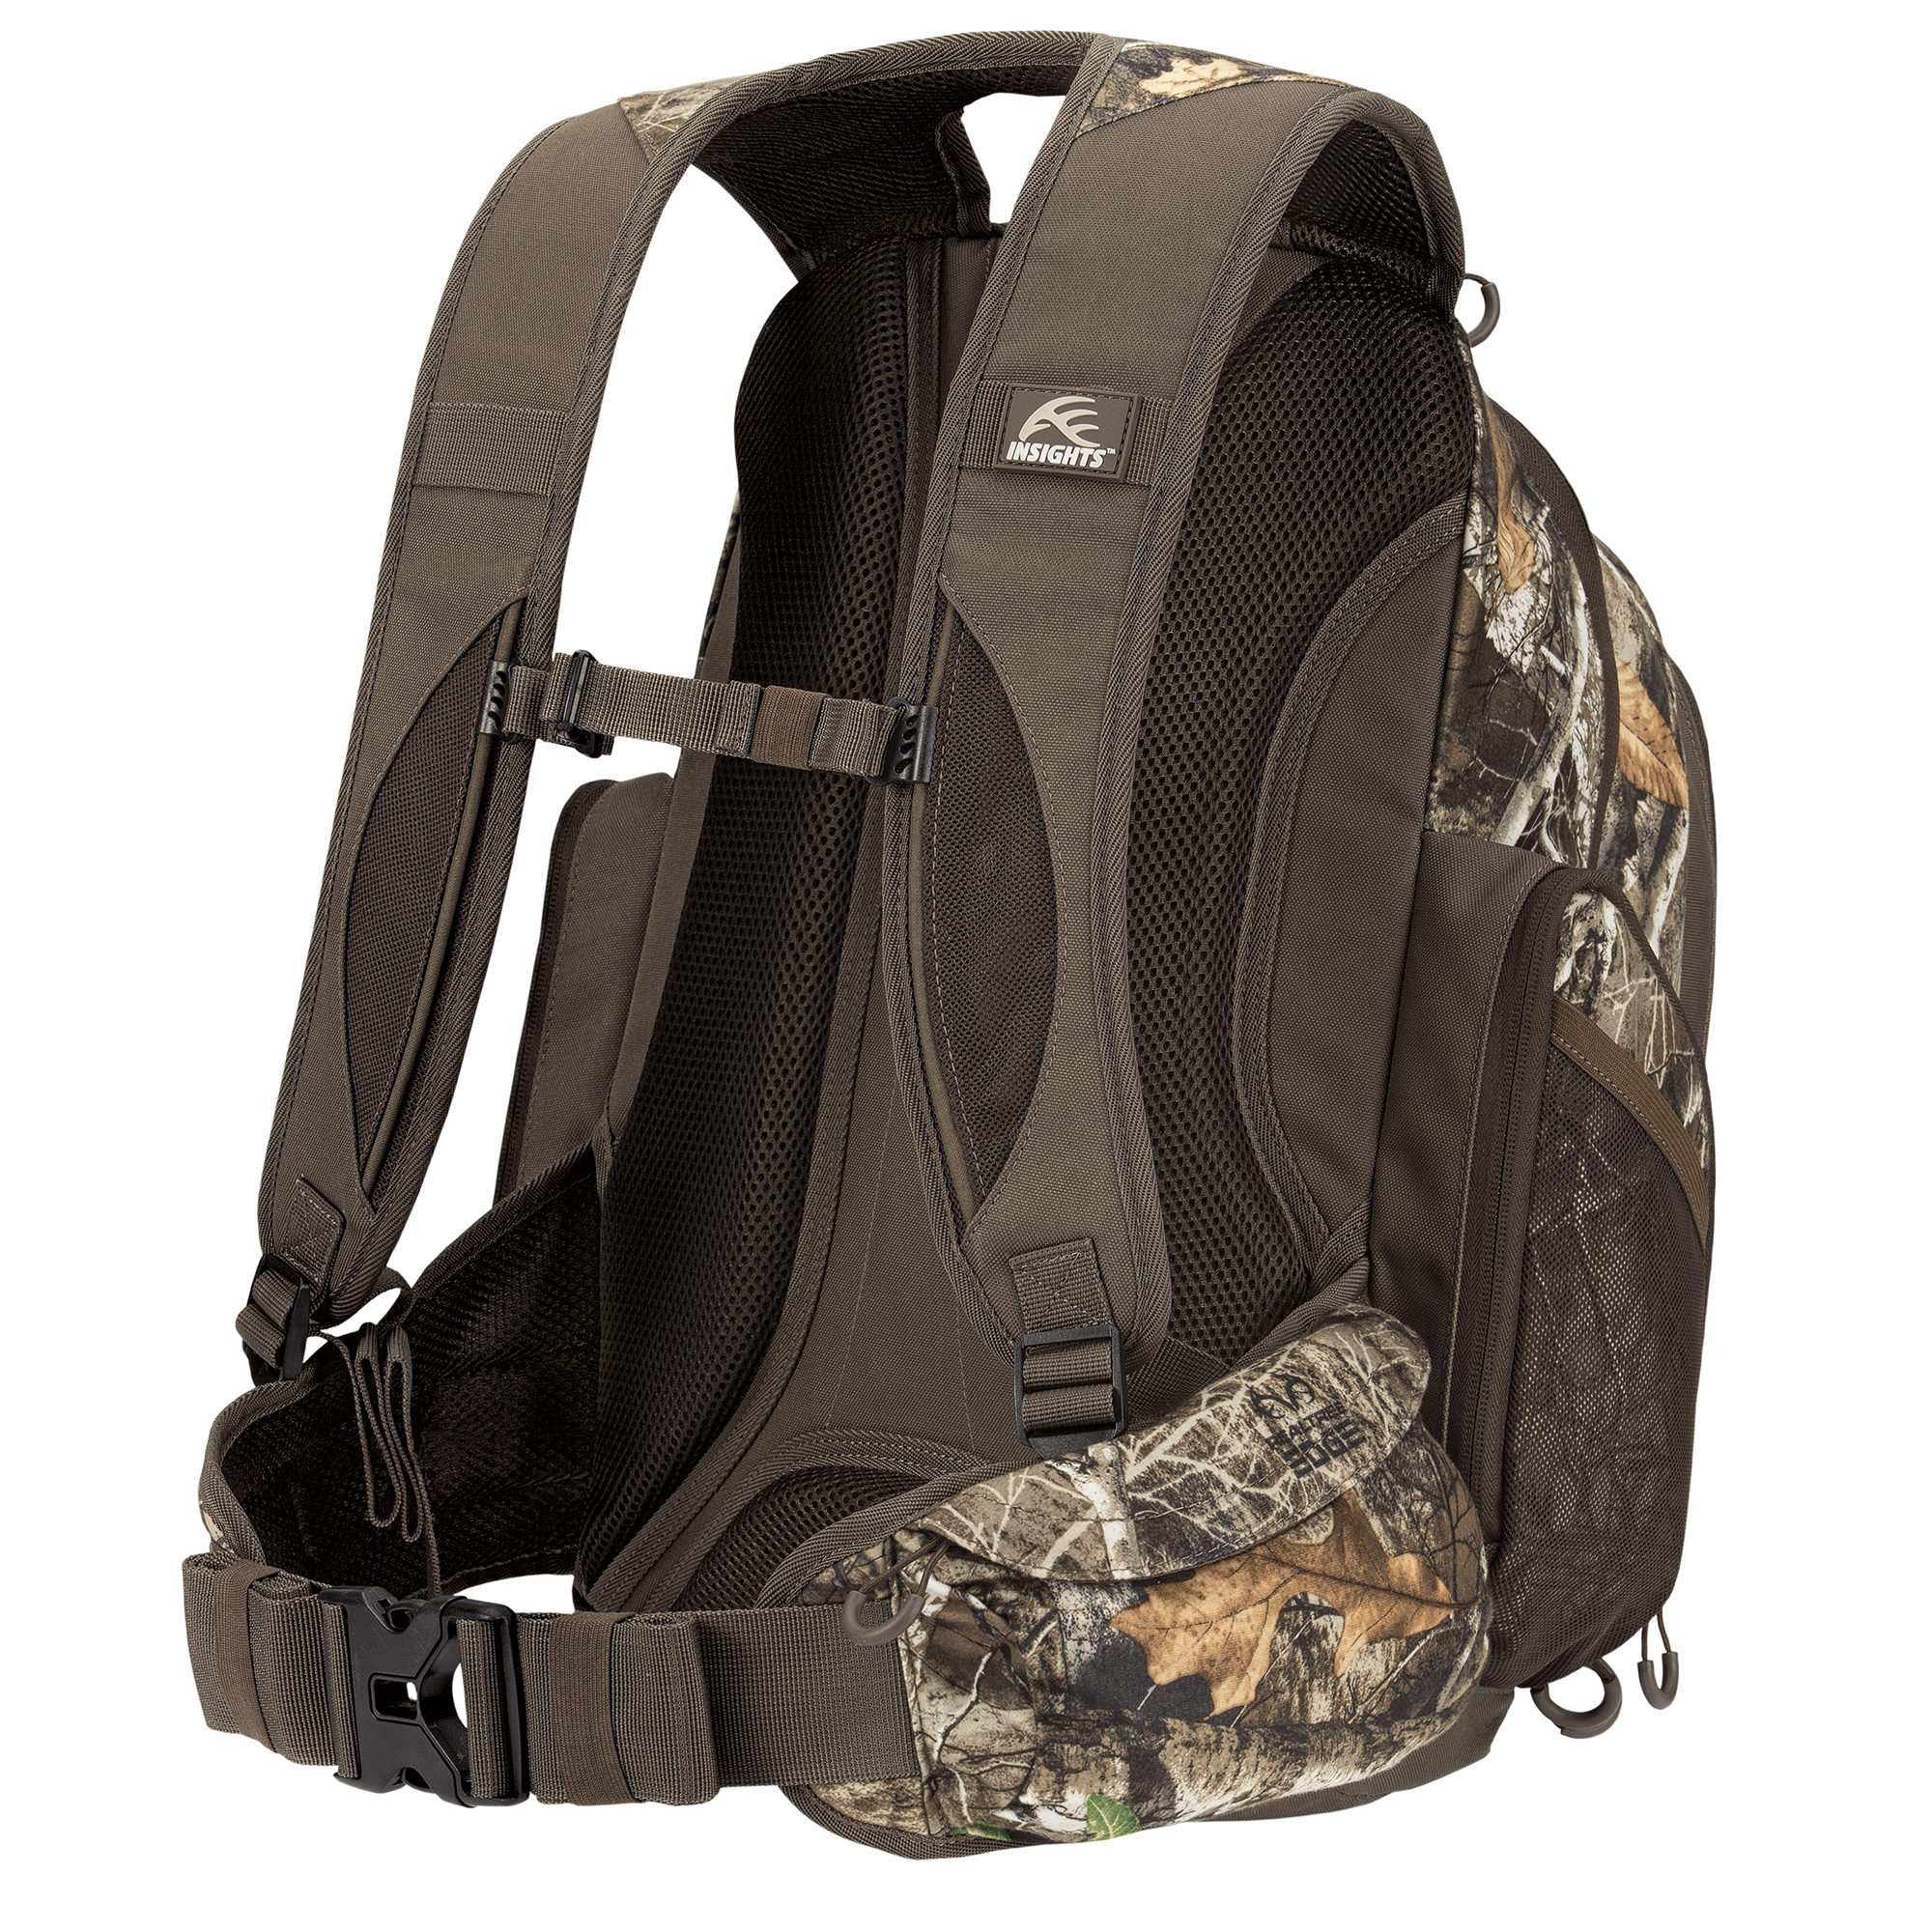 Insights 9301 The Element Outdoor Hiking Hunting Backpack, Realtree Edge Camo - image 5 of 9